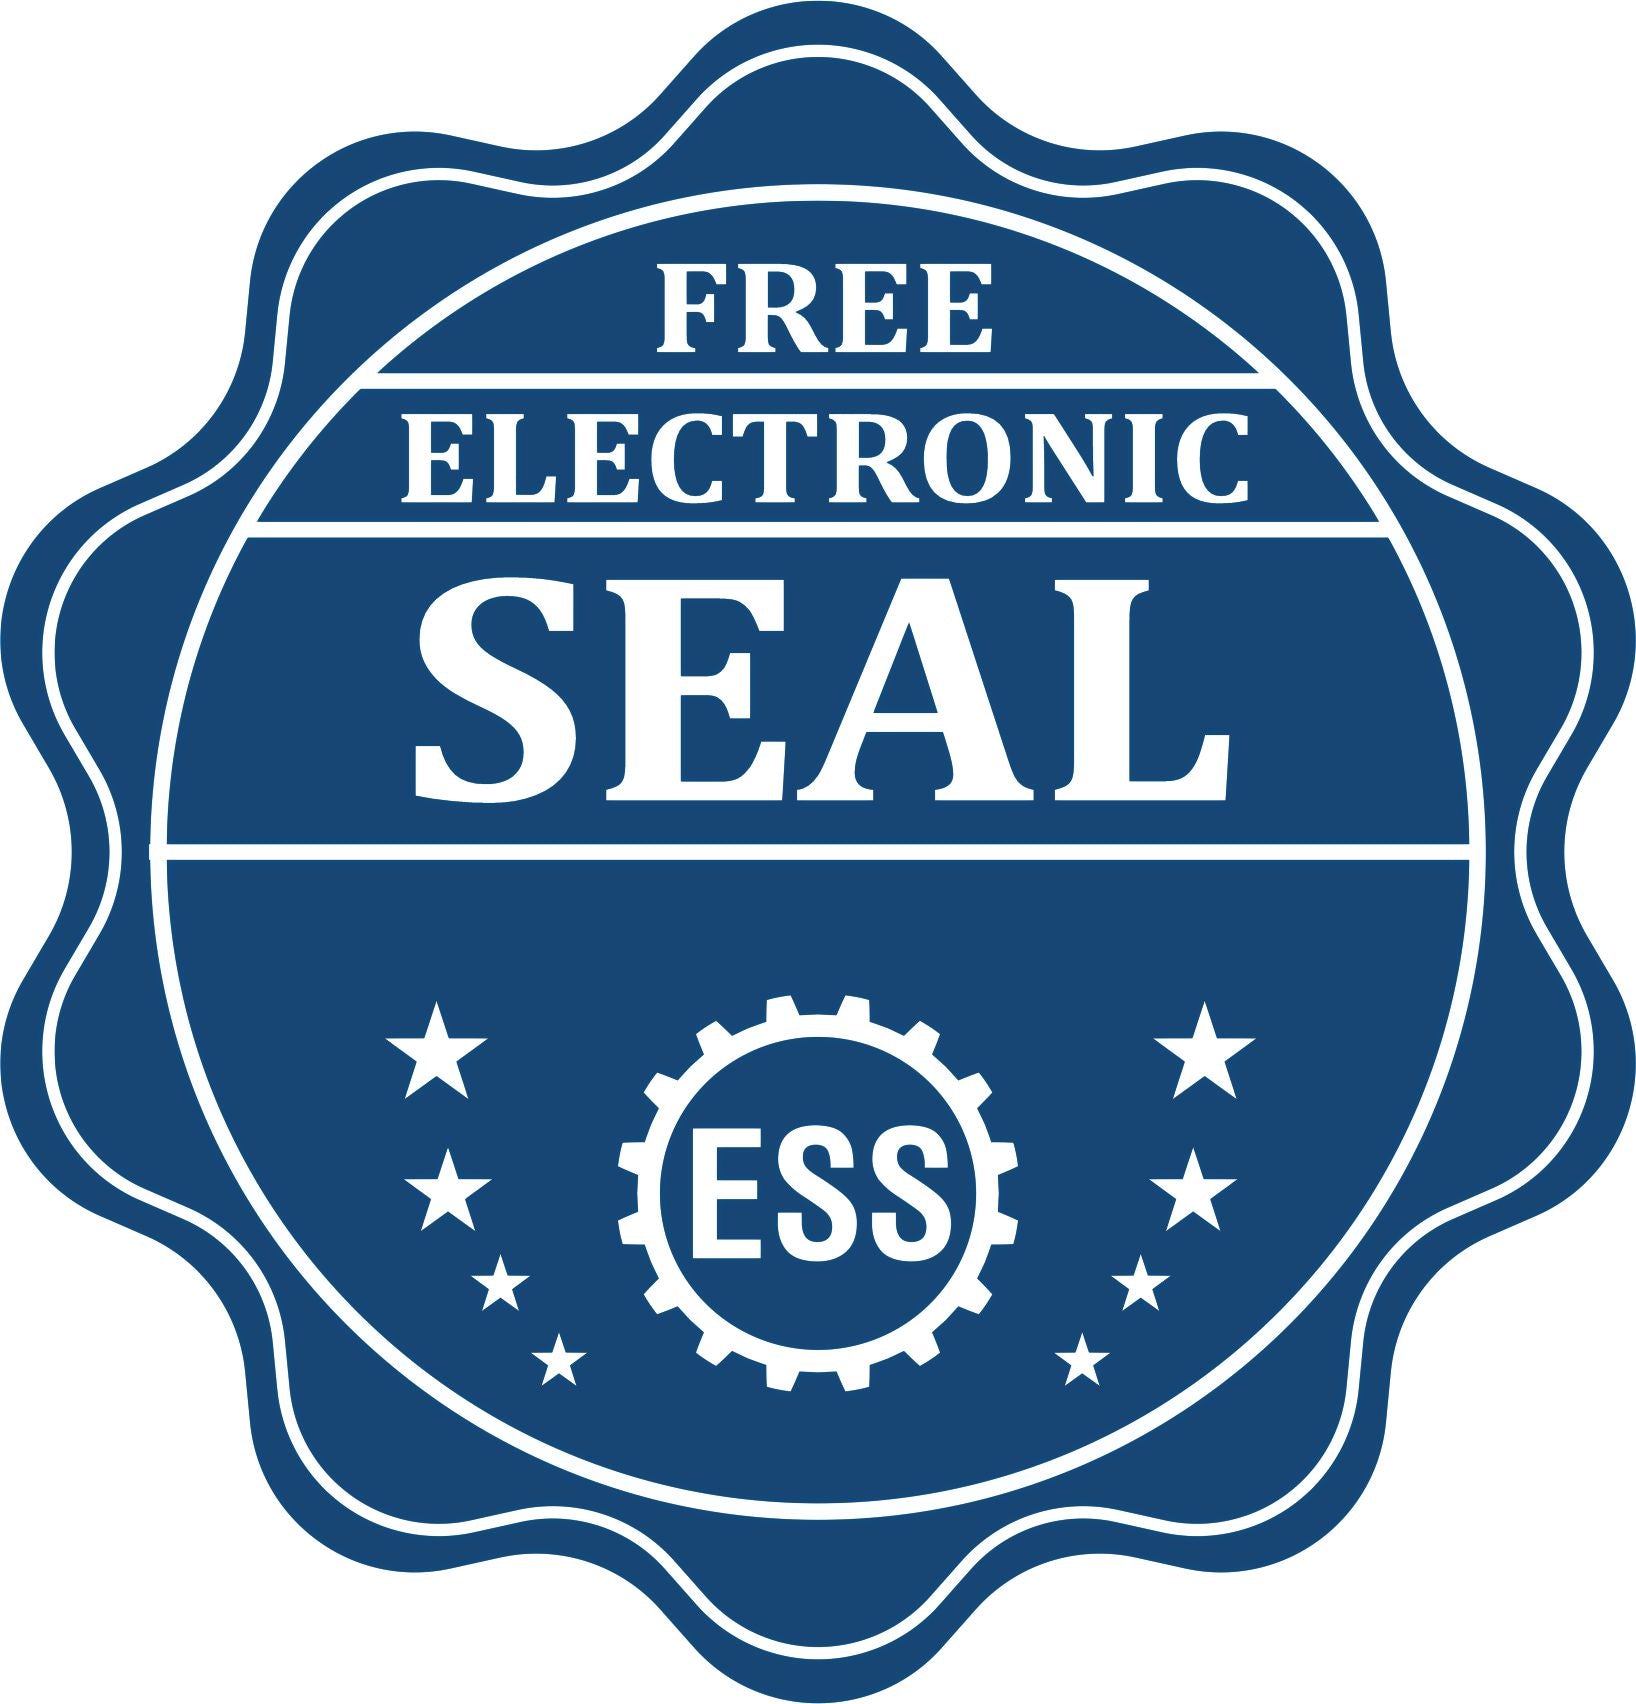 A badge showing a free electronic seal for the State of Hawaii Extended Long Reach Geologist Seal with stars and the ESS gear on the emblem.